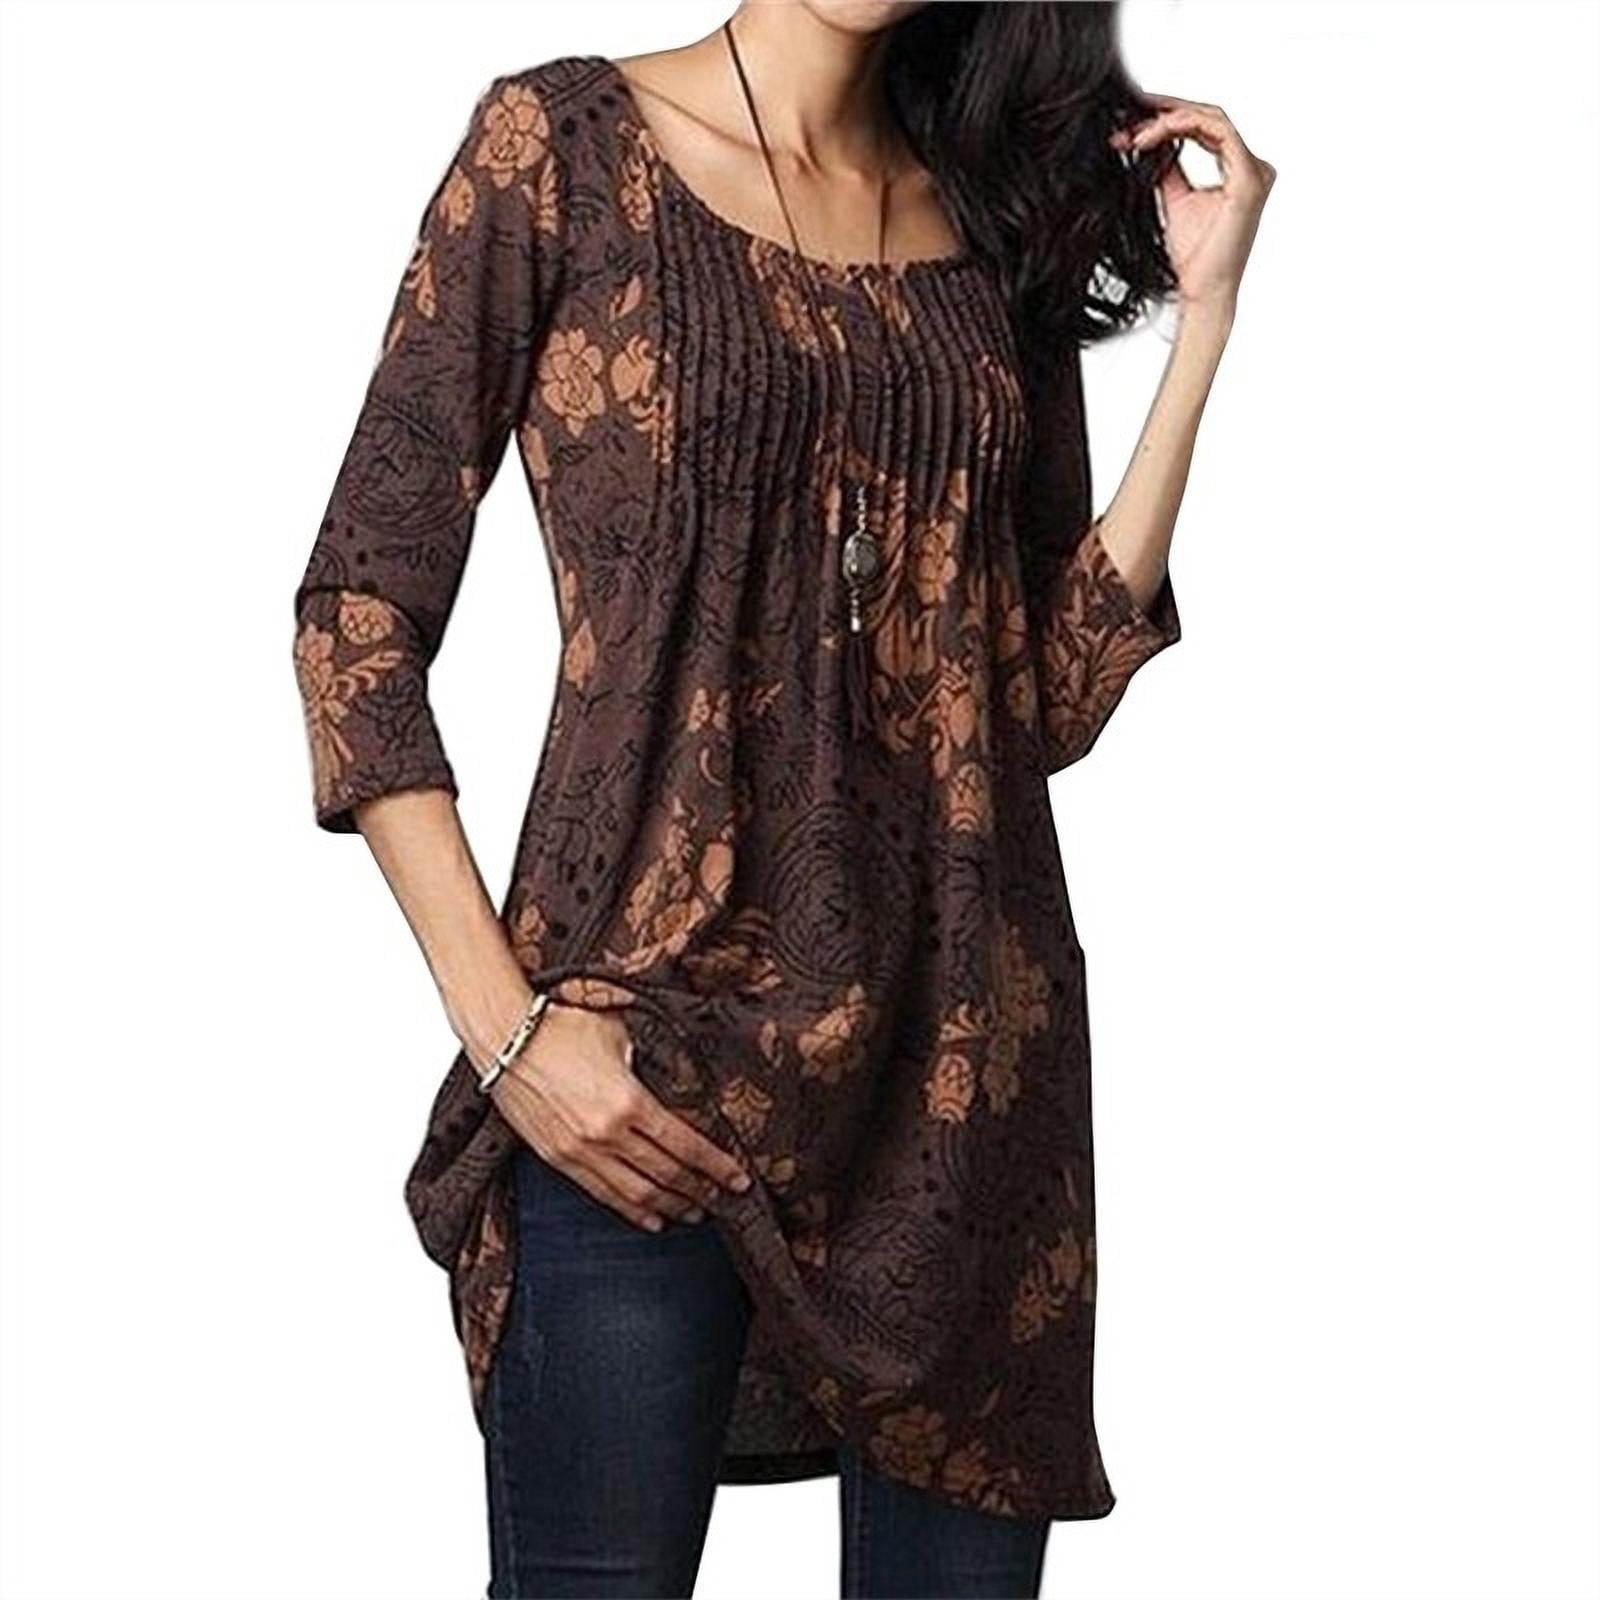 Fashion Women's Vintage Empire Waist Paisley Floral Printed 3/4 Sleeve Flared Tunic Dress Tops Plus Size S-5XL